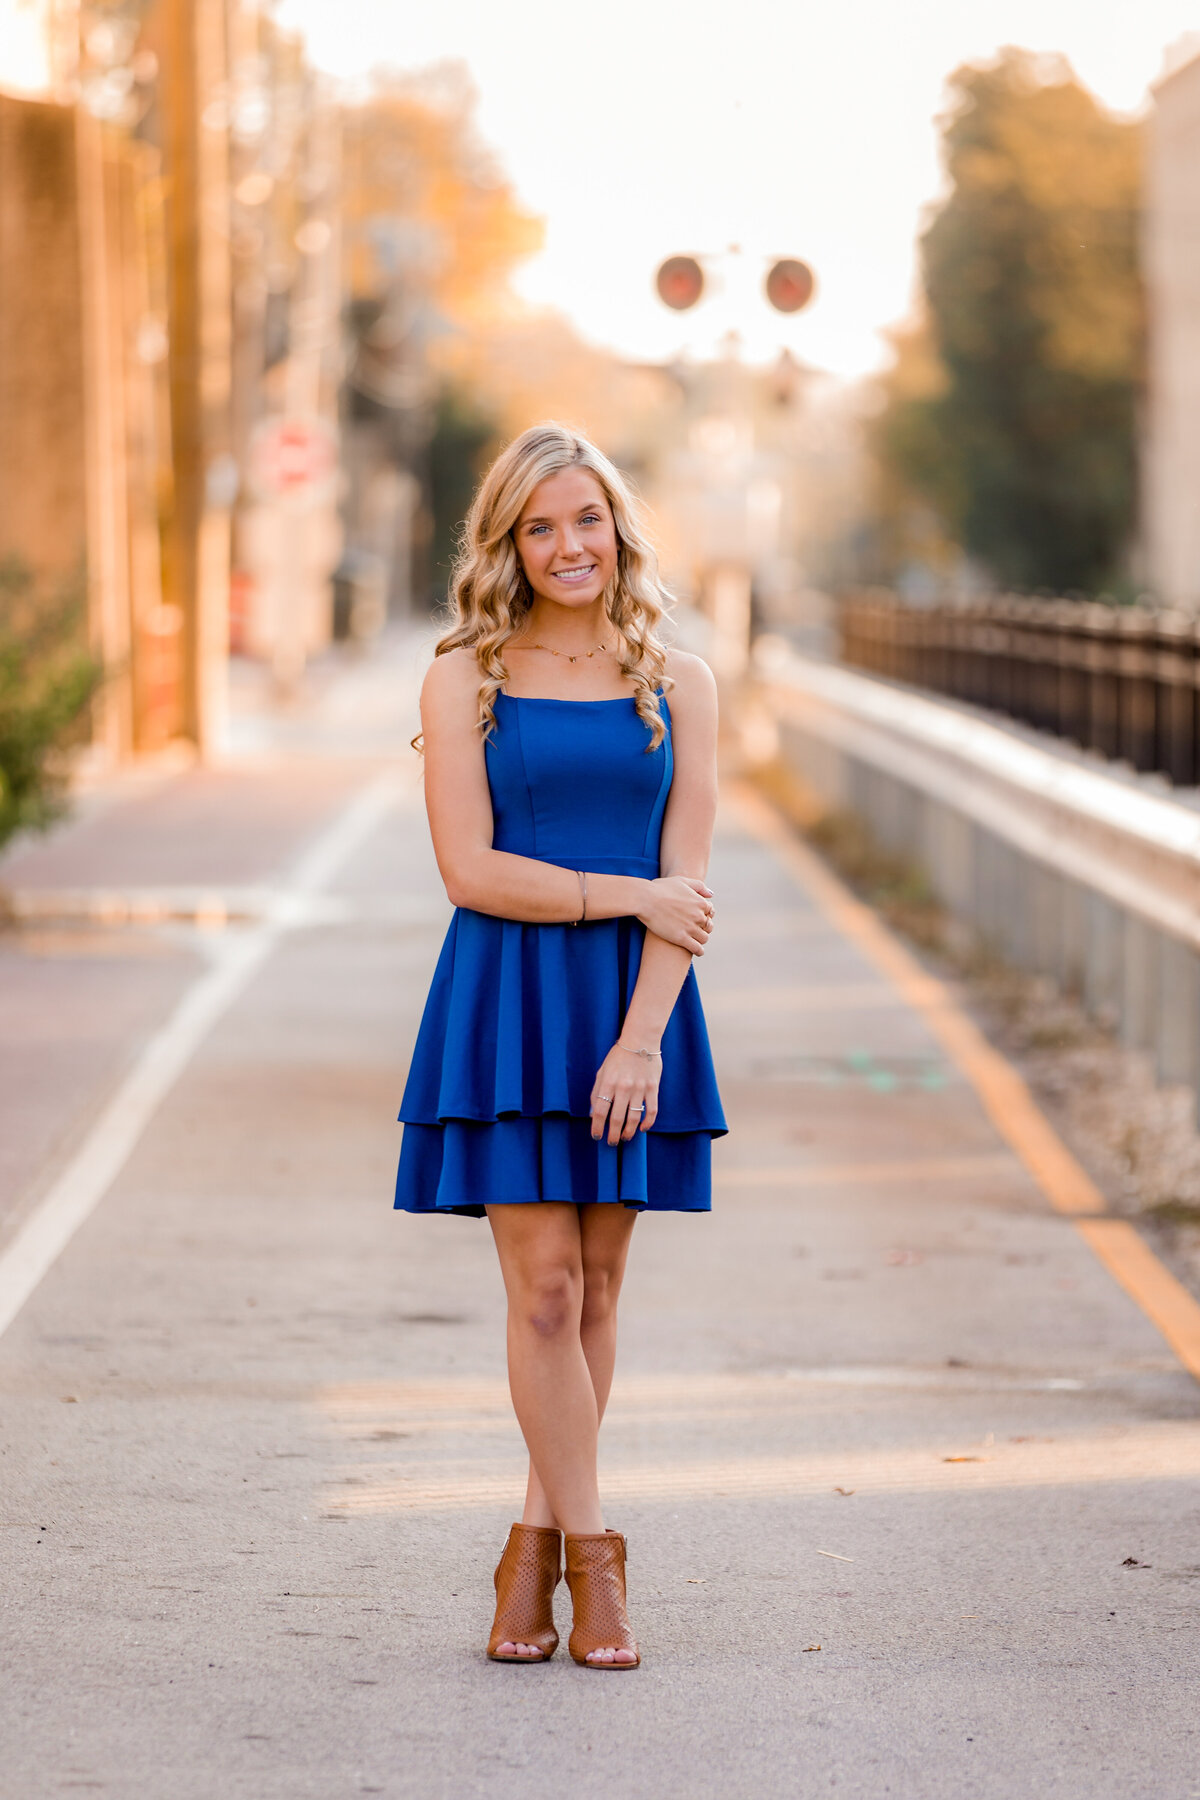 Kailey stands in the alley in a blue dress with her ankles crossed.